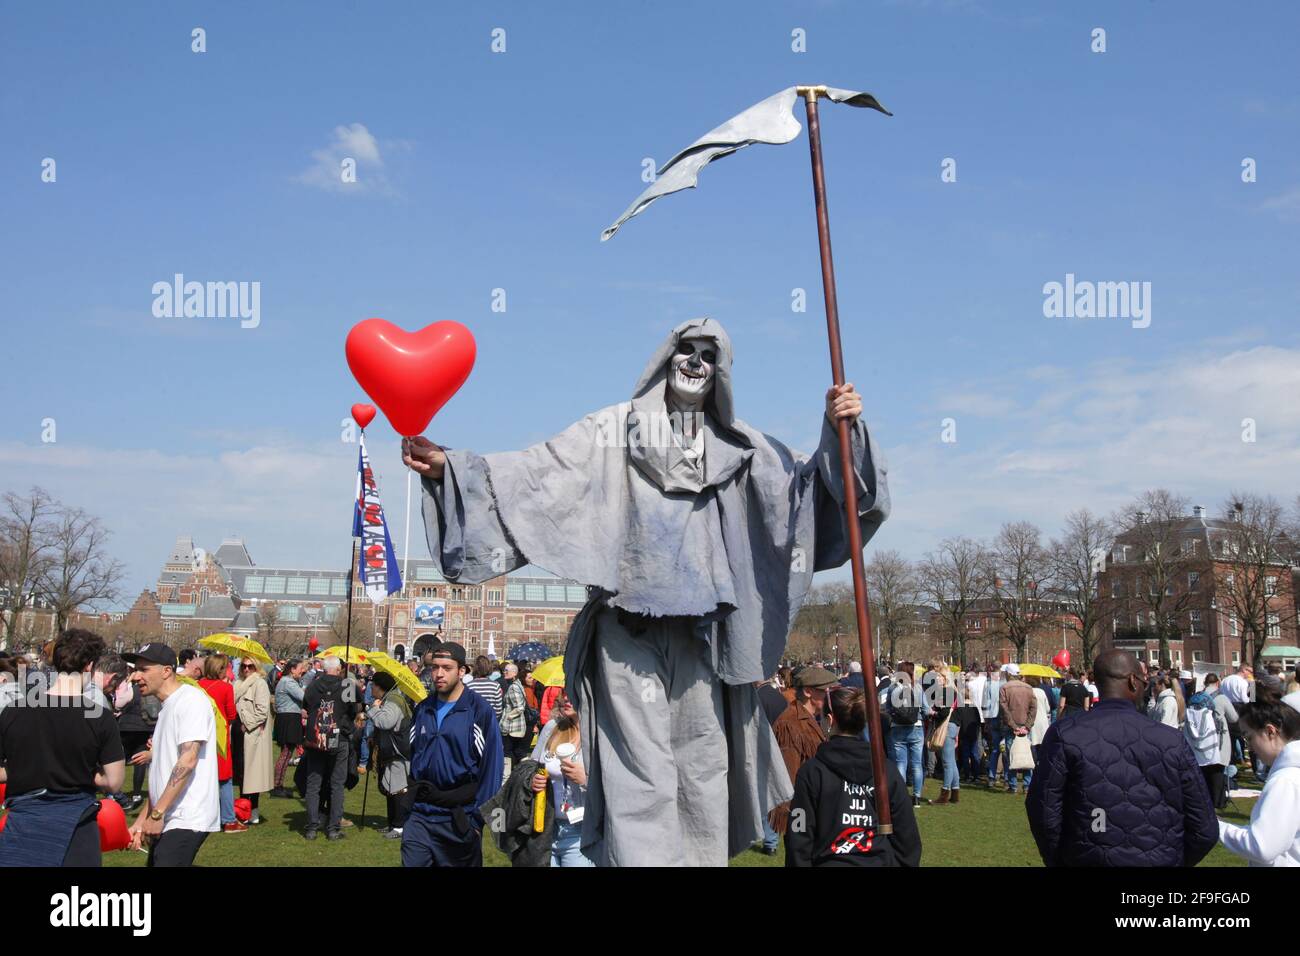 Anti-lockdown protester dressed as the grim reaper hold a ballon hart  during an illegal demonstration anti-vaccination and coronavirus measures at the Muaeumplein on April 18, 2021 in Amsterdam,Netherlands. (Photo by Paulo Amorim/Sipa USA) Stock Photo